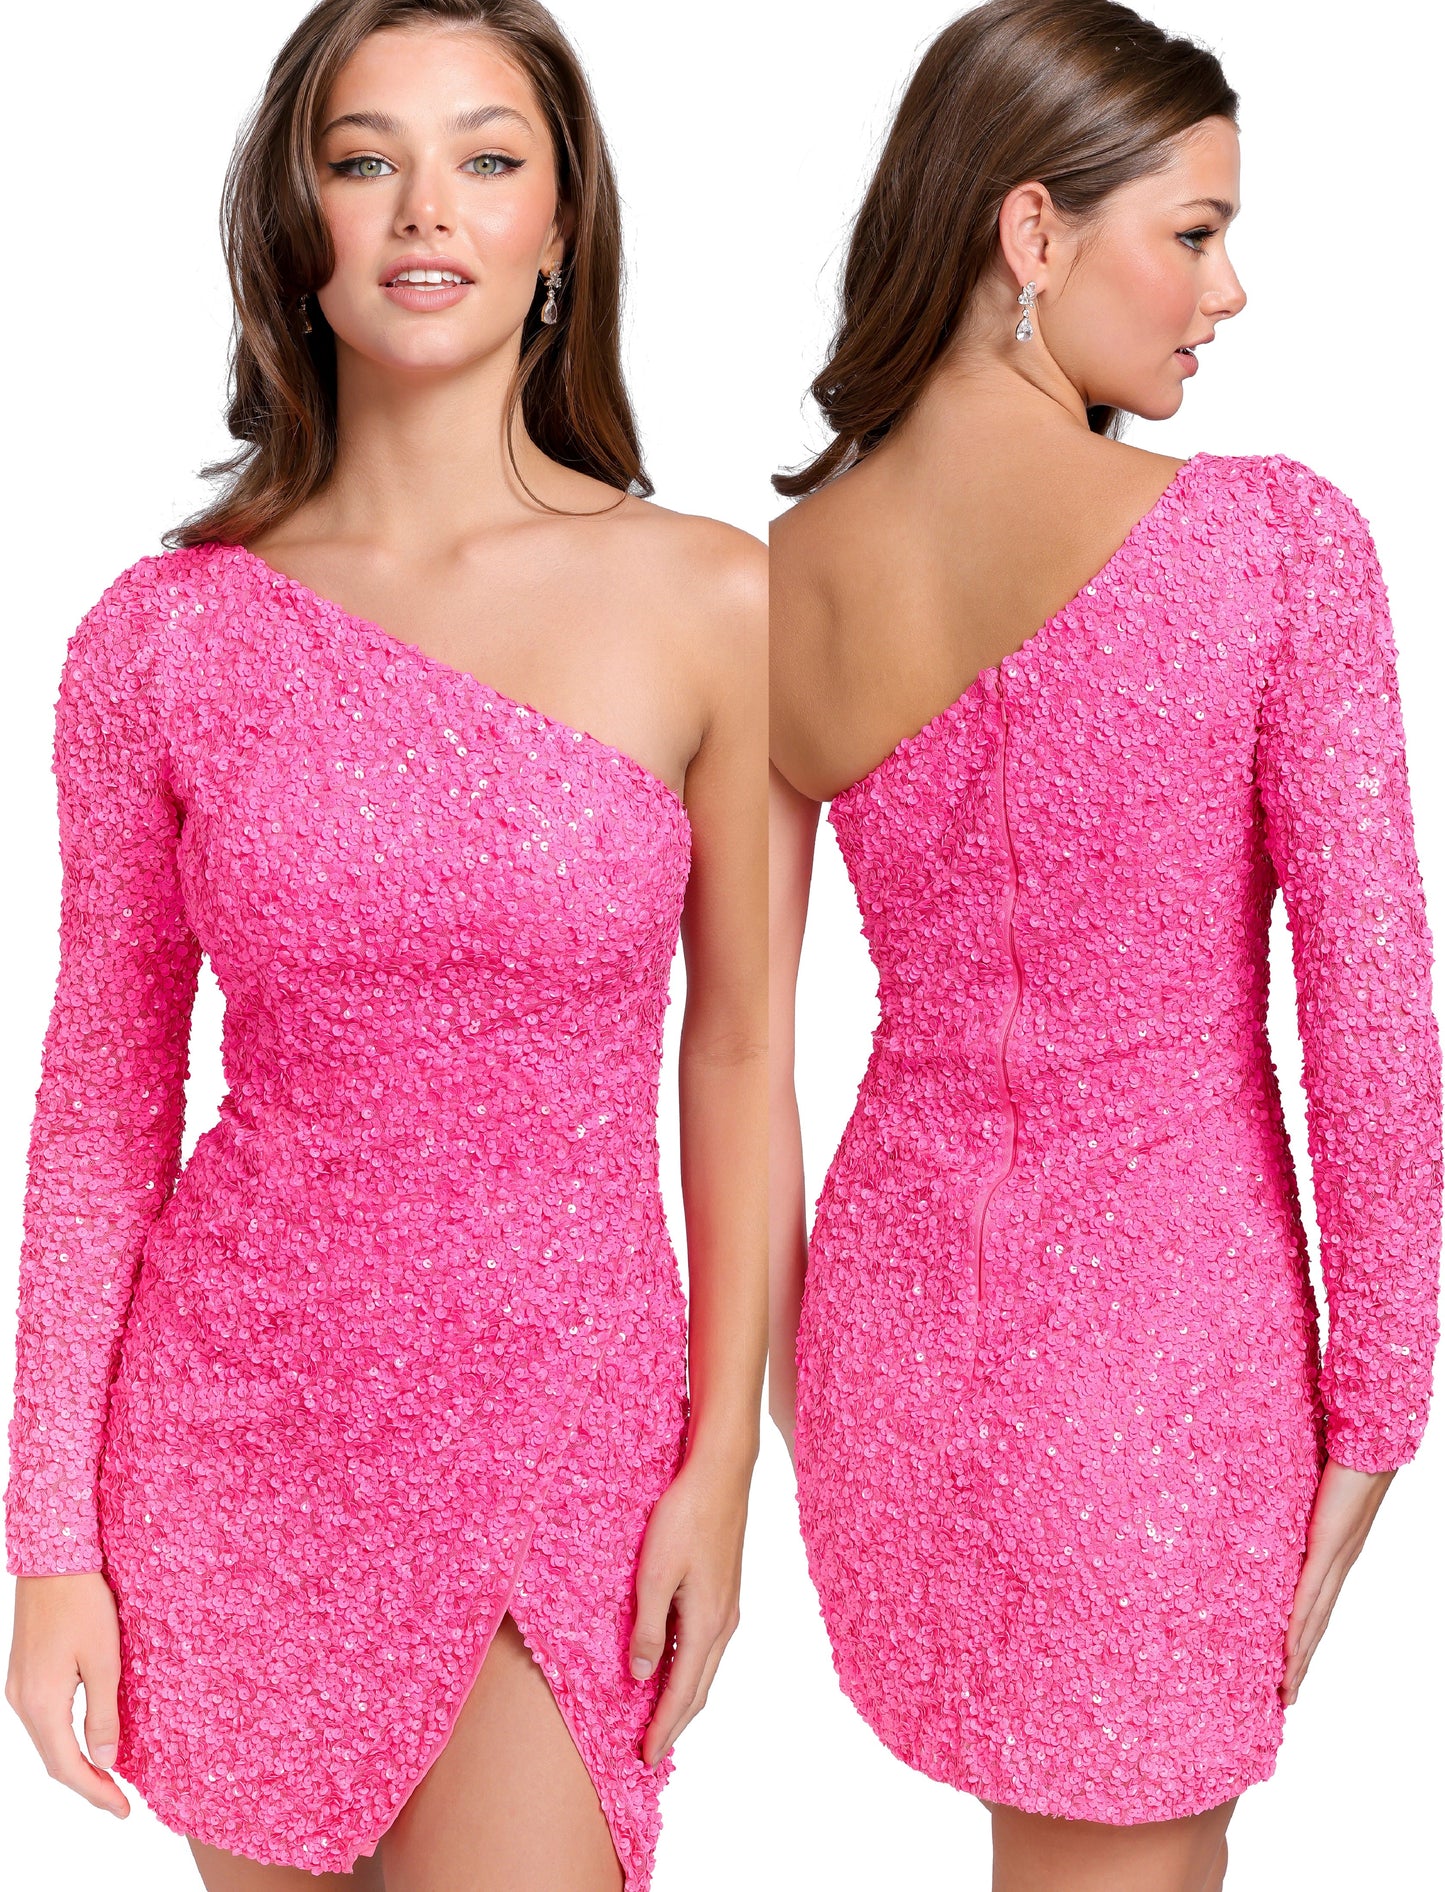 Primavera Couture 3860 Short 2023 Homecoming dress Fitted sequin beaded short cocktail dress One Shoulder Long Sleeve Maxi slit Homecoming  Available Color- Baby Pink, Gold, Lilac, Light Blue, Neon Pink, Red, Royal Blue, Apple Green, Mint, Peacock  Available Size-00-18